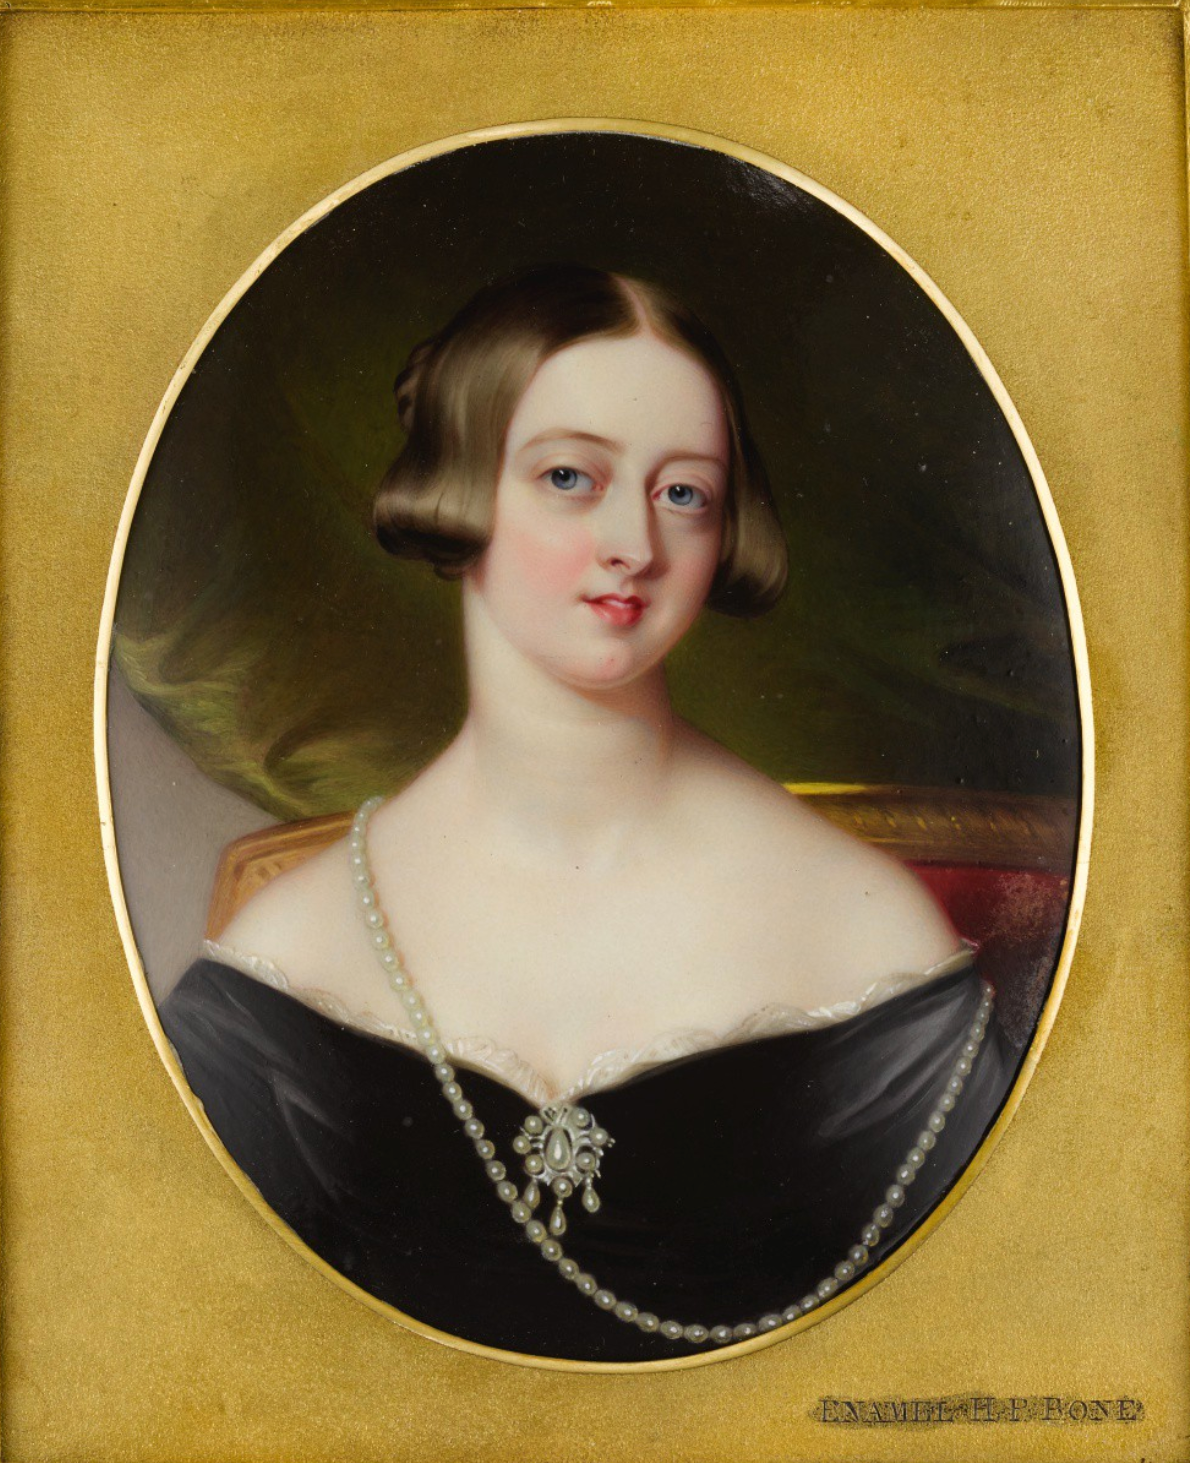 Queen Victoria, 1840 by Henry Pierce Bone, sold in July 2020 at Sotheby's for 17,500 GBP 